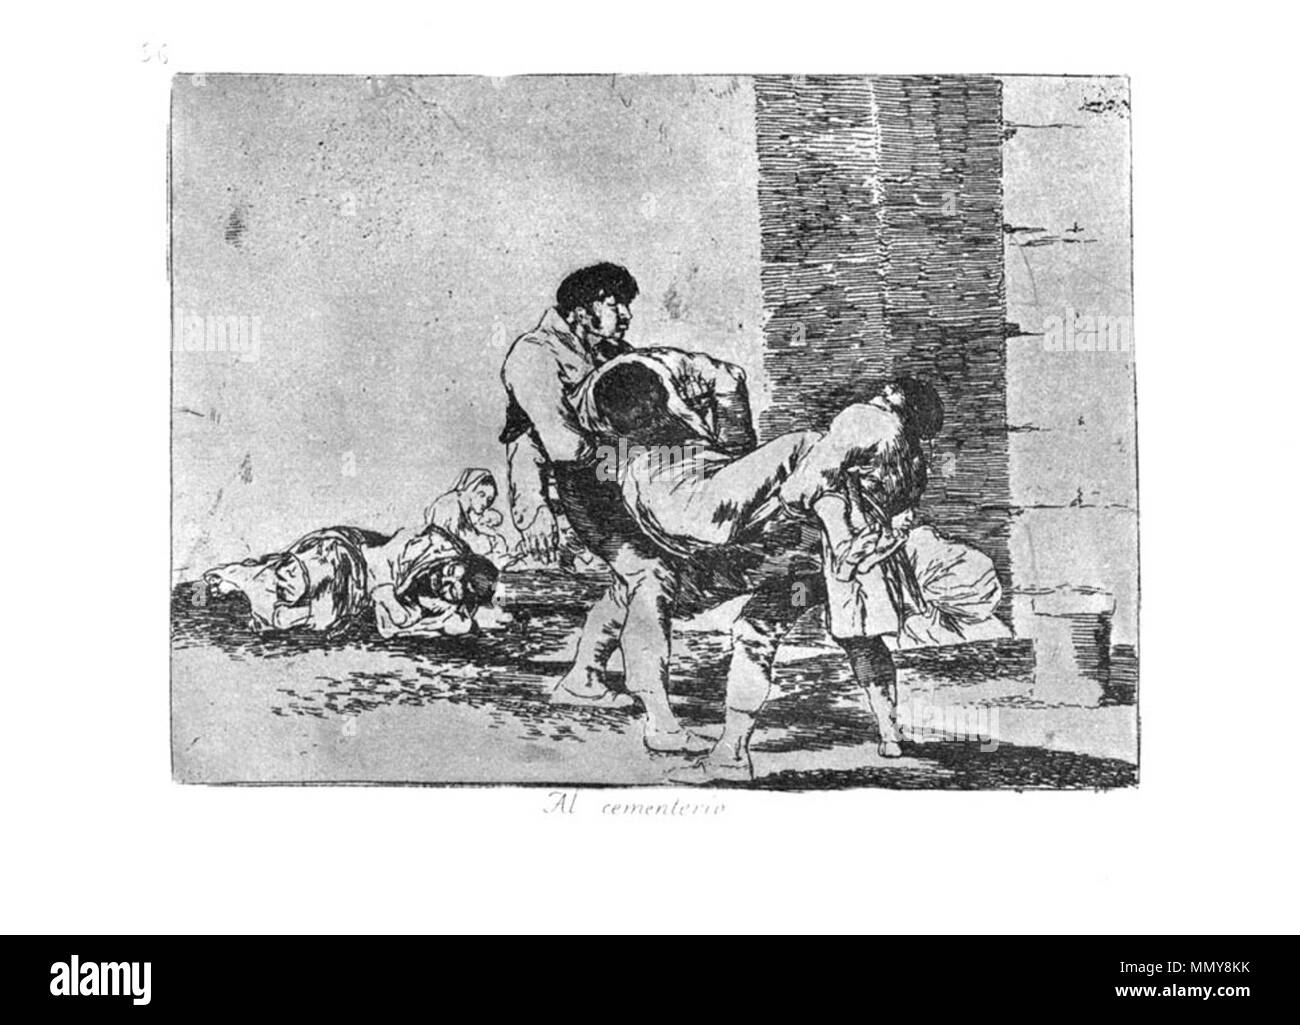 . Los Desatres de la Guerra is a set of 80 aquatint prints created by Francisco Goya in the 1810s. Plate 56: Al cementerio. (To the cemetery. )  . 1810s.   Francisco Goya  (1746–1828)      Alternative names Francisco Goya Lucientes, Francisco de Goya y Lucientes, Francisco José Goya Lucientes  Description Spanish painter, printmaker, lithographer, engraver and etcher  Date of birth/death 30 March 1746 16 April 1828  Location of birth/death Fuendetodos Bordeaux  Work location Madrid, Zaragoza, Bordeaux  Authority control  : Q5432 VIAF:?54343141 ISNI:?0000 0001 2280 1608 ULAN:?500118936 LCCN:?n7 Stock Photo